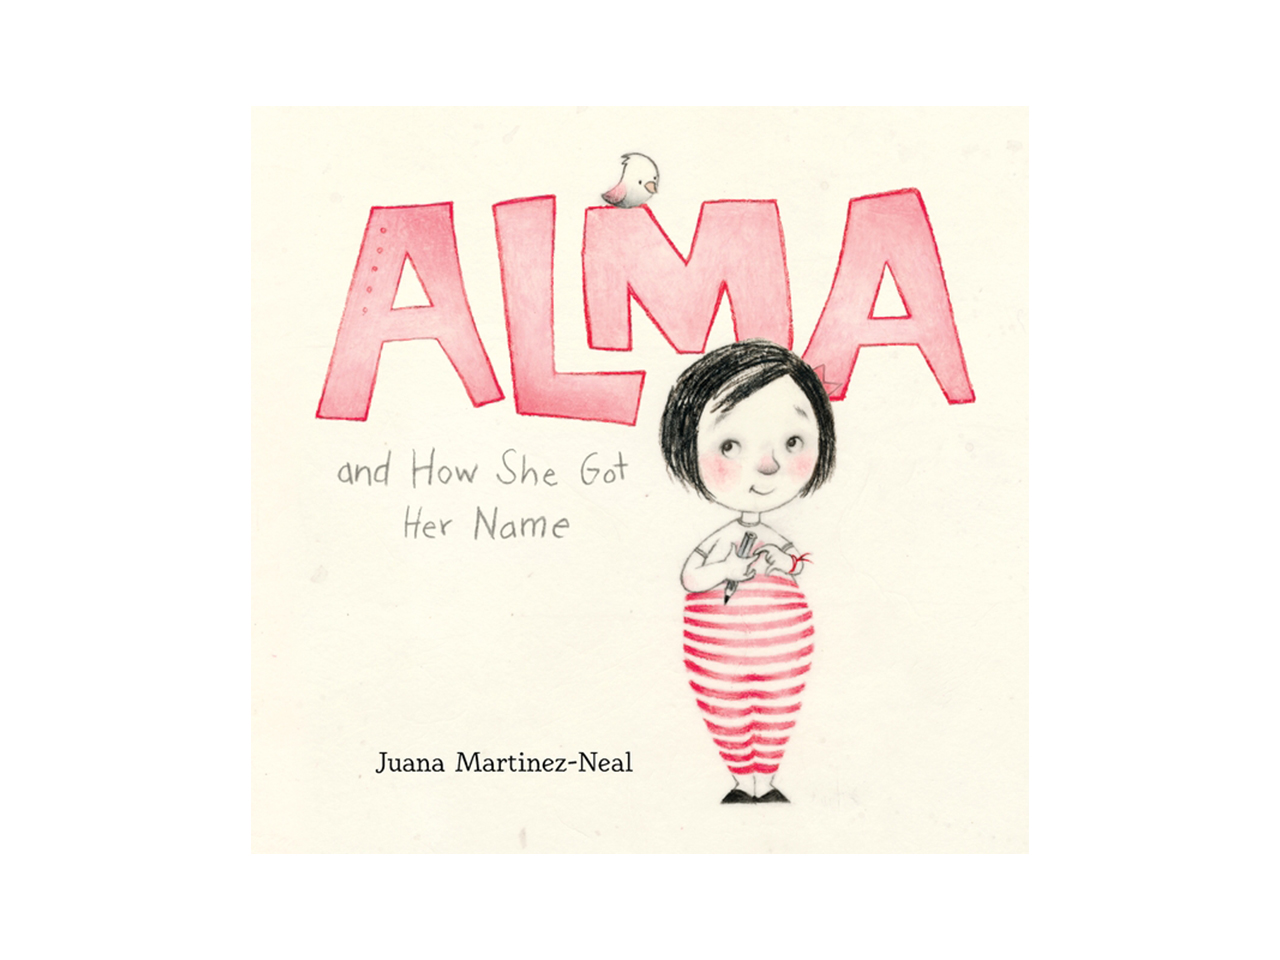 Cover art for Alma and How She Got Her Name showing an illustrated girl wearing striped pants and holding a pencil